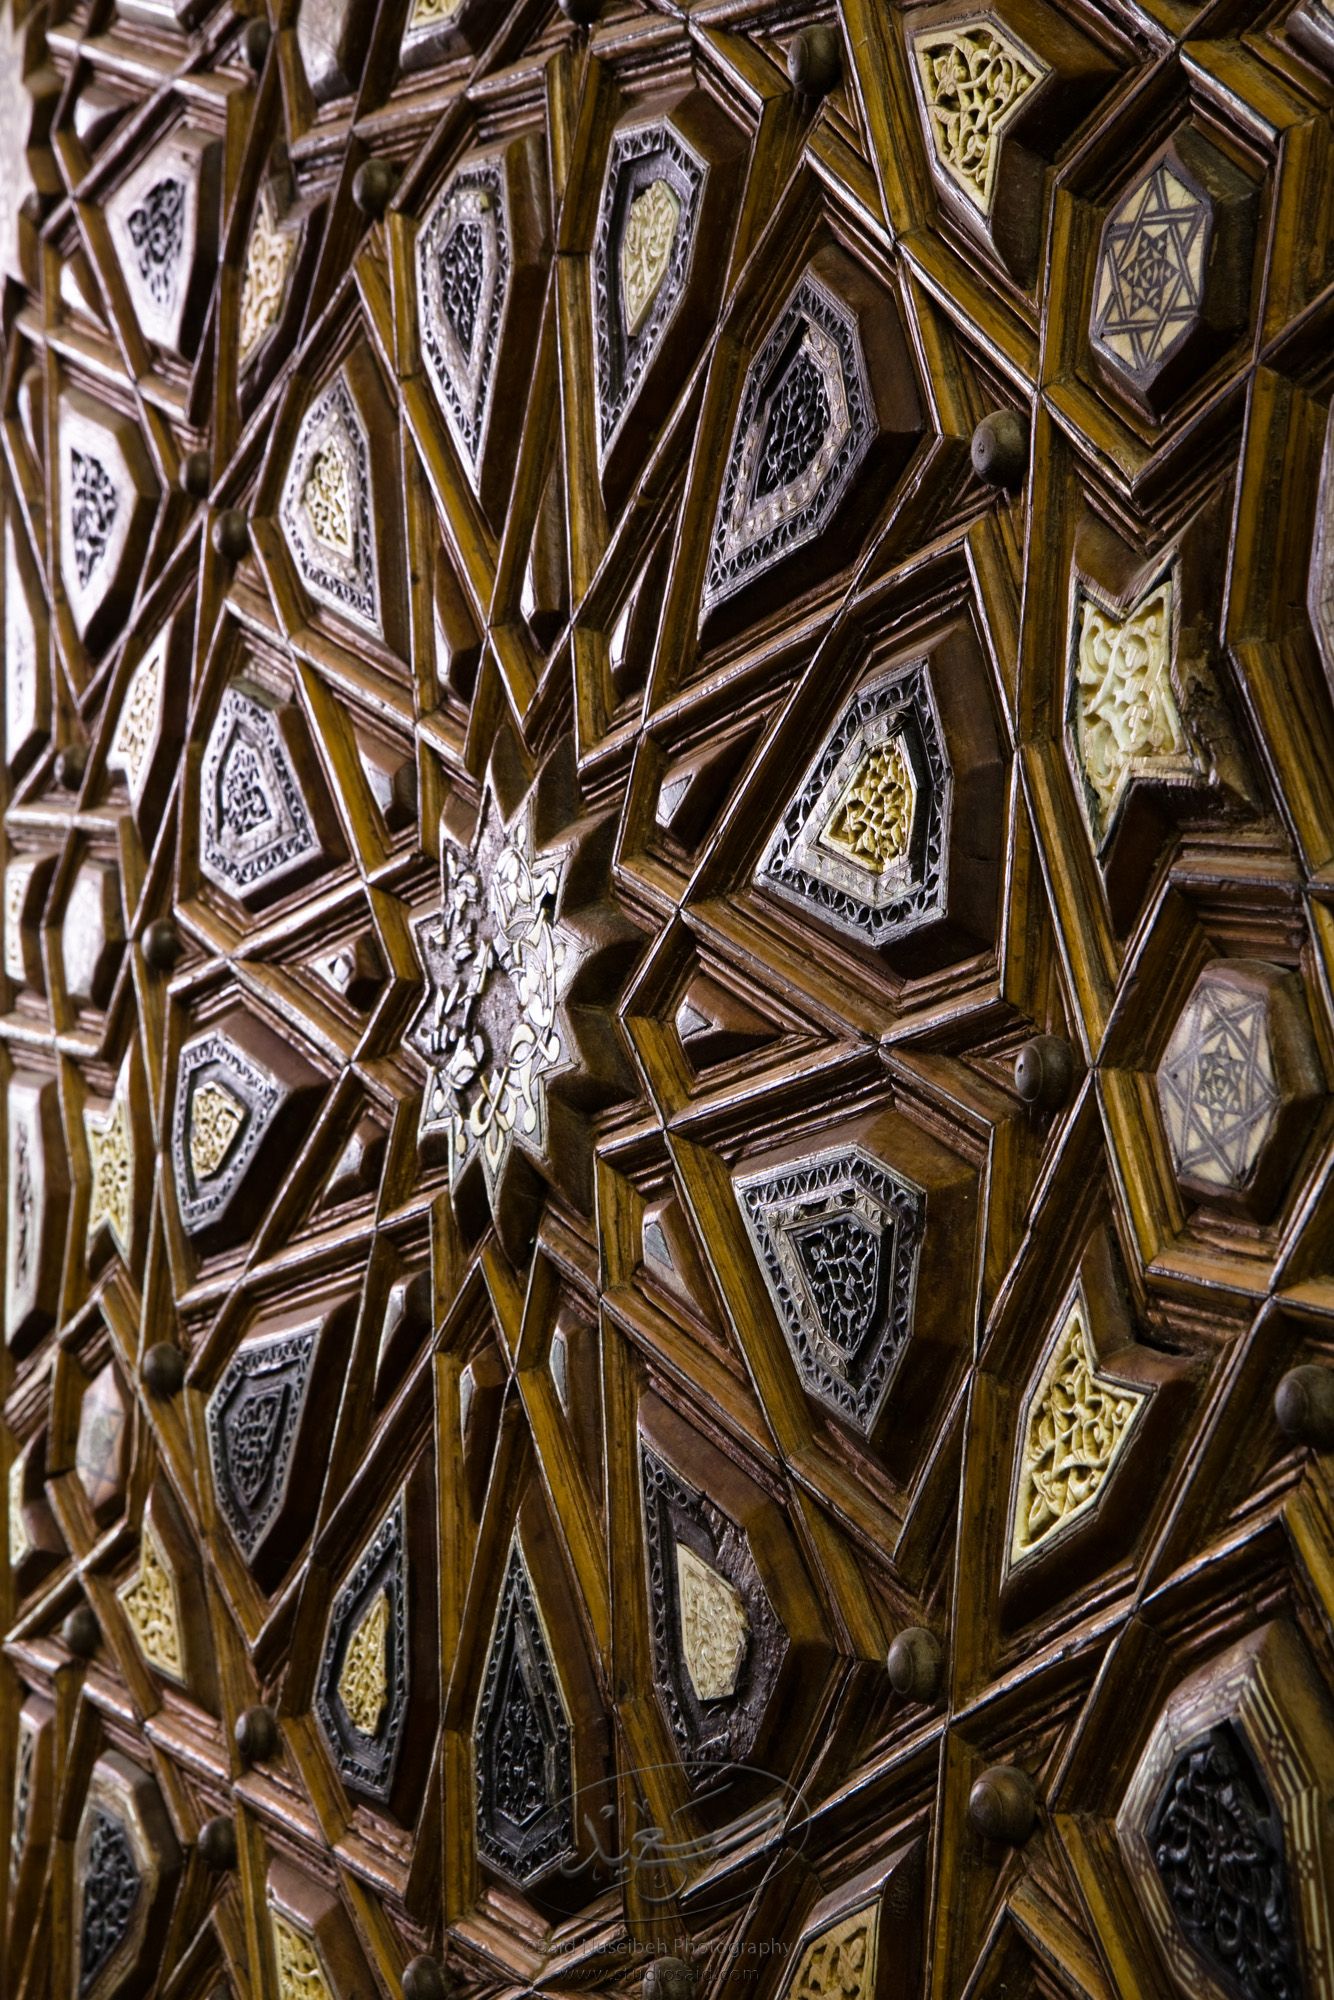 "Dodecagons. Minbar, Carved Woodwork and Inlay Detail"The late-13th / early-14th c. Mamluk minbar, or pulpit, of Sultan al-Nasir Muhammad, the ninth Mamluk Sultan from Cairo and son of Qalawun. The minbar was located in the Umayyad Mosque in Aleppo, Haleb, prior to its damage and disappearance in May 2013.